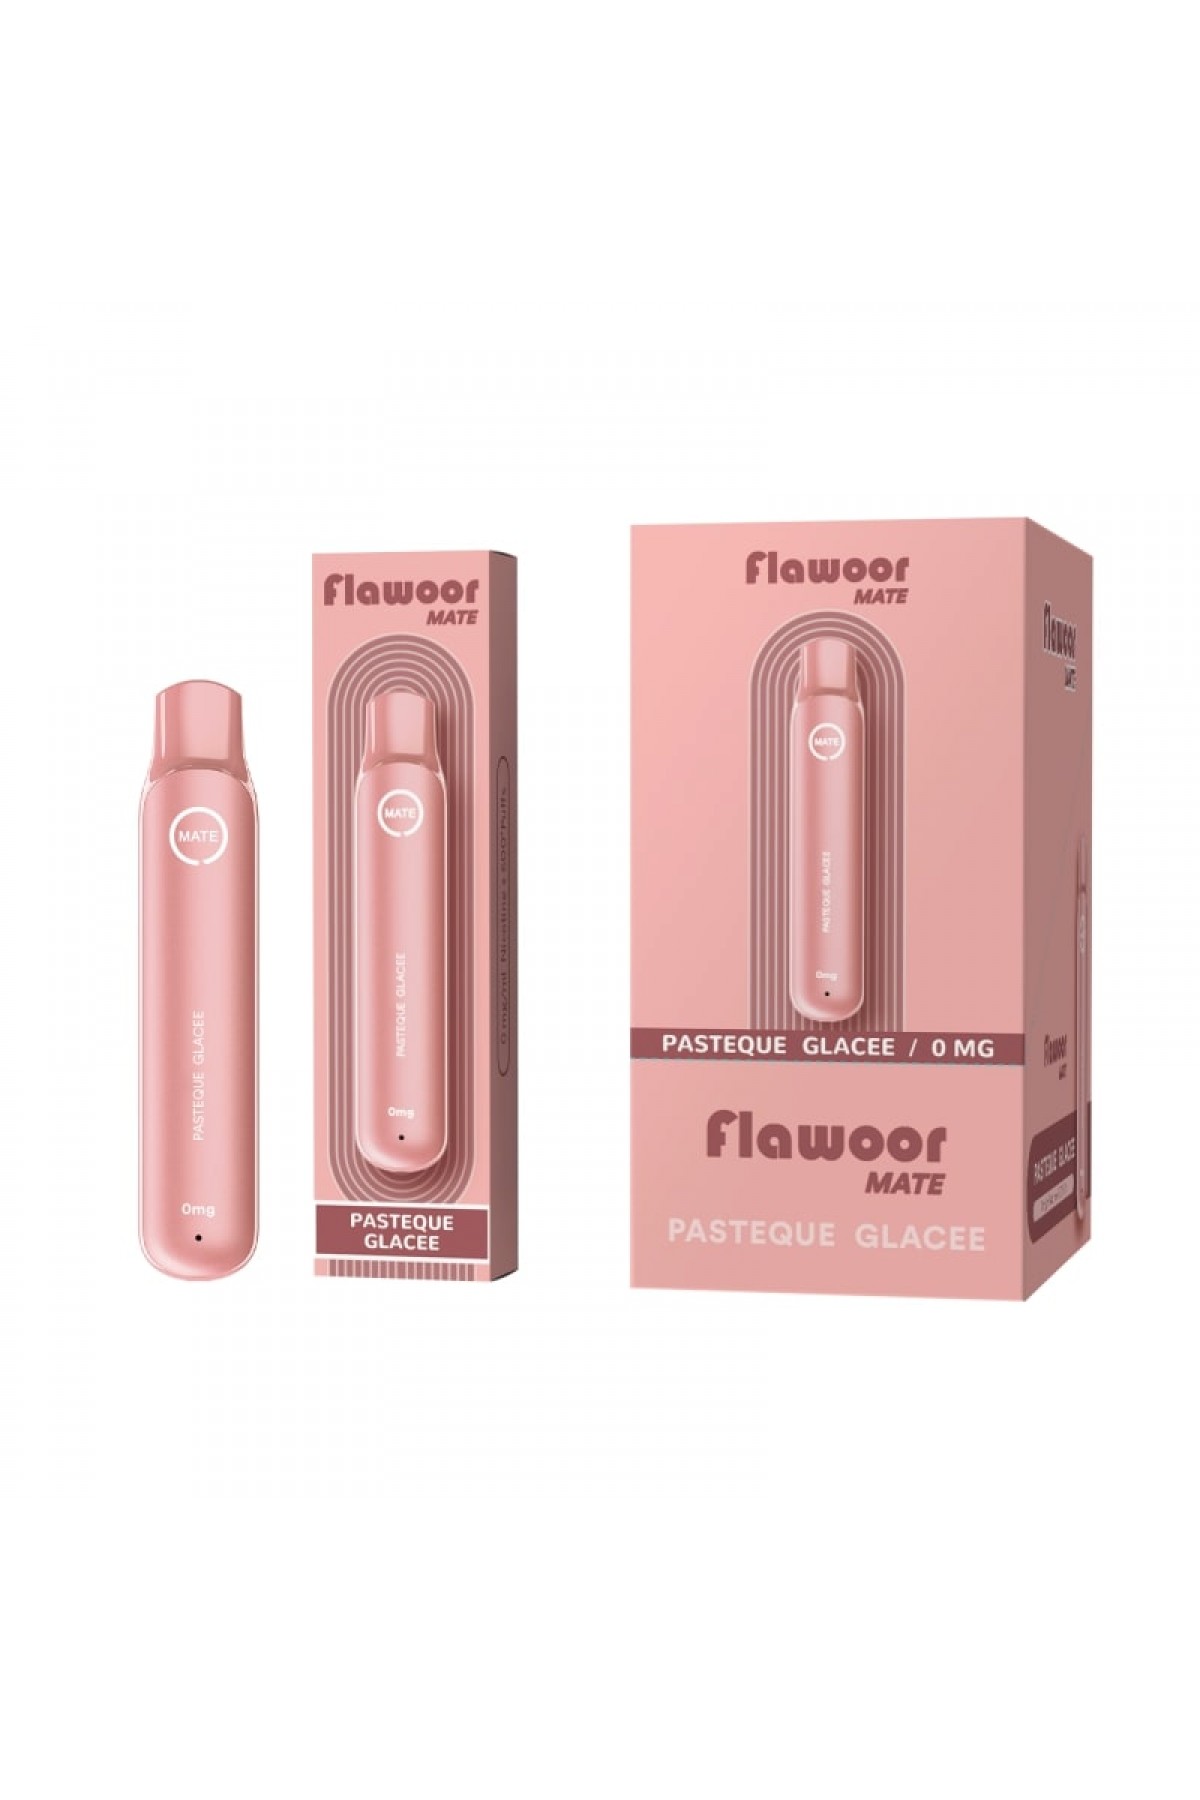 Flawoor Mate - Pastéque Glacée 600 Puff Kit